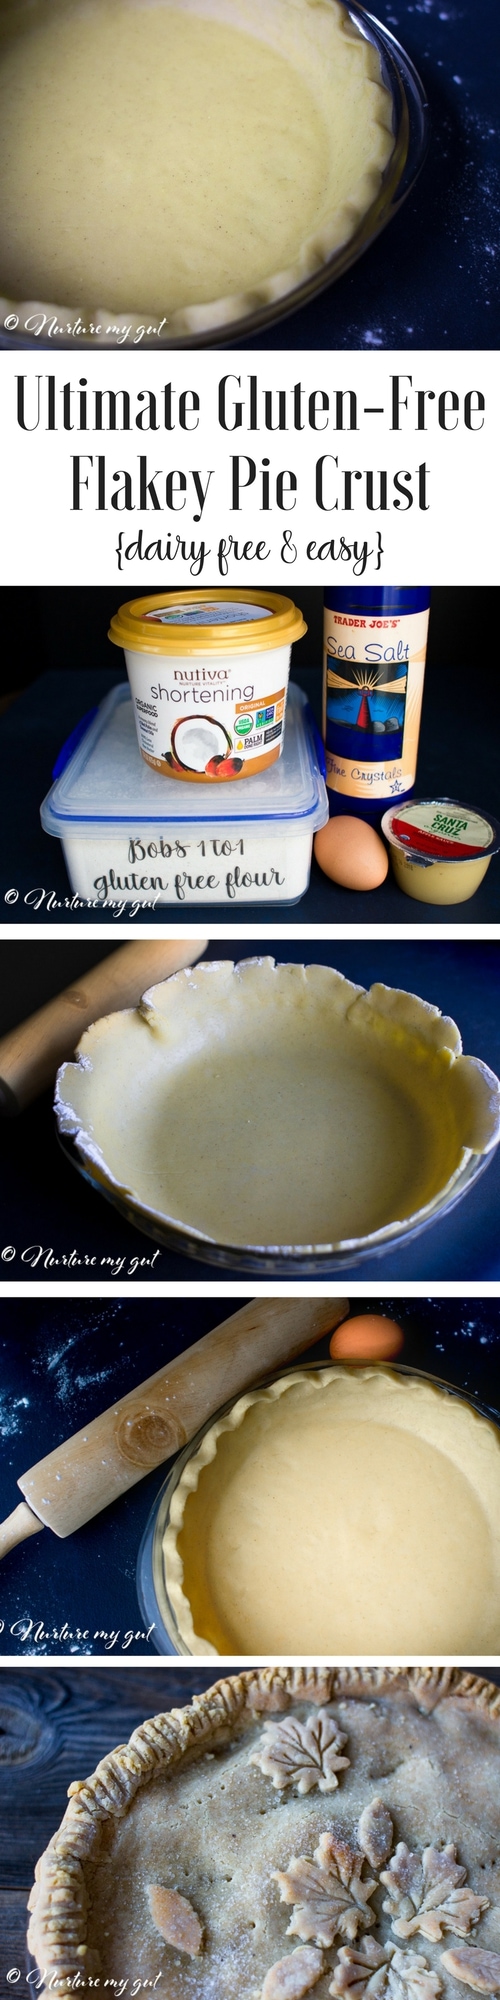 Ultimate Gluten-Free Flakey Pie Crust Recipe. This "pillsbury style" pie crust is perfect for making pot pie, pumpkin pie and many more fabulous desserts! This pie crust is completely gluten and dairy free.